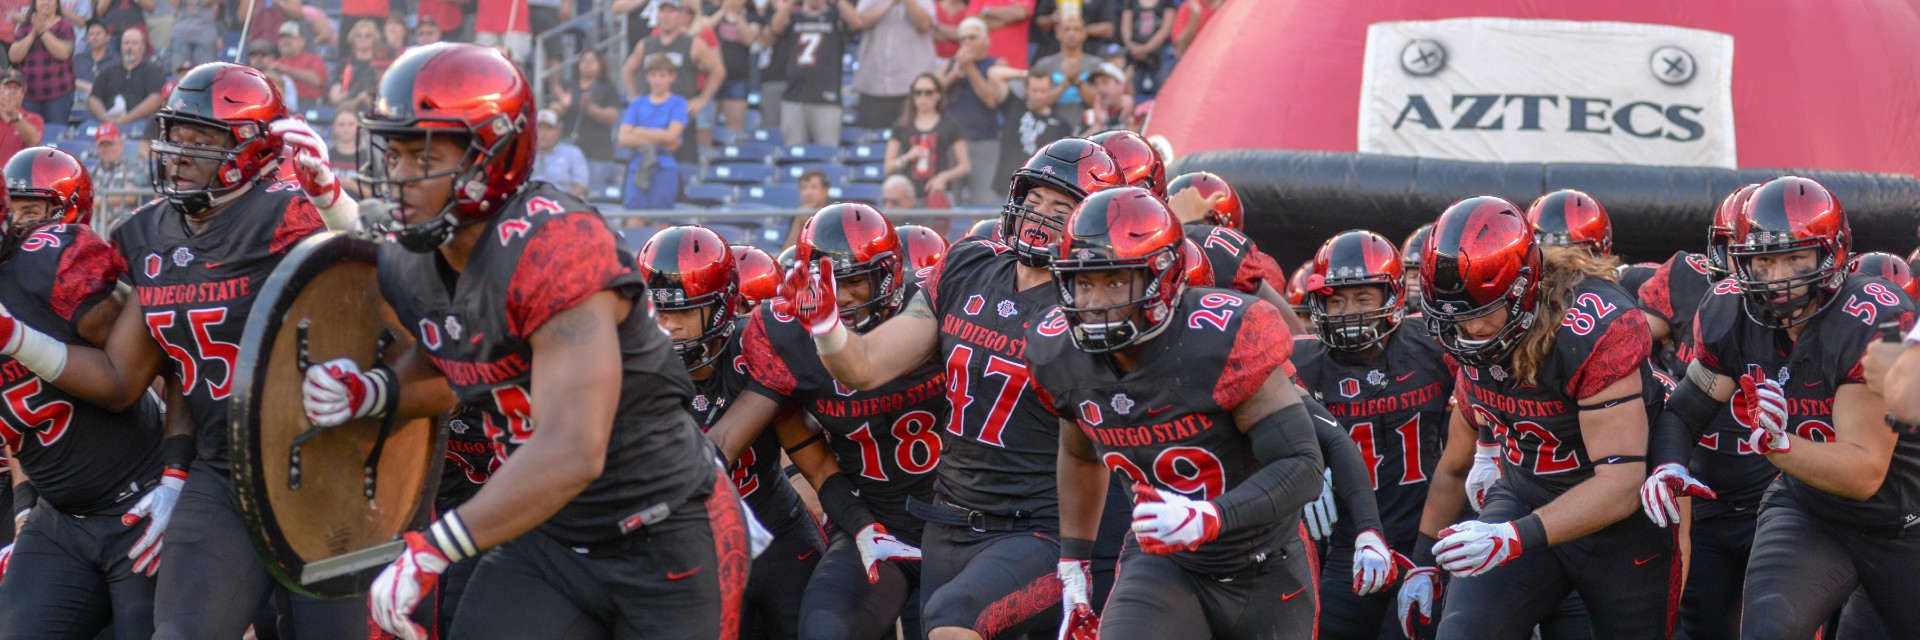 ncaa-college football-betting-odds-pick-san diego state-byu